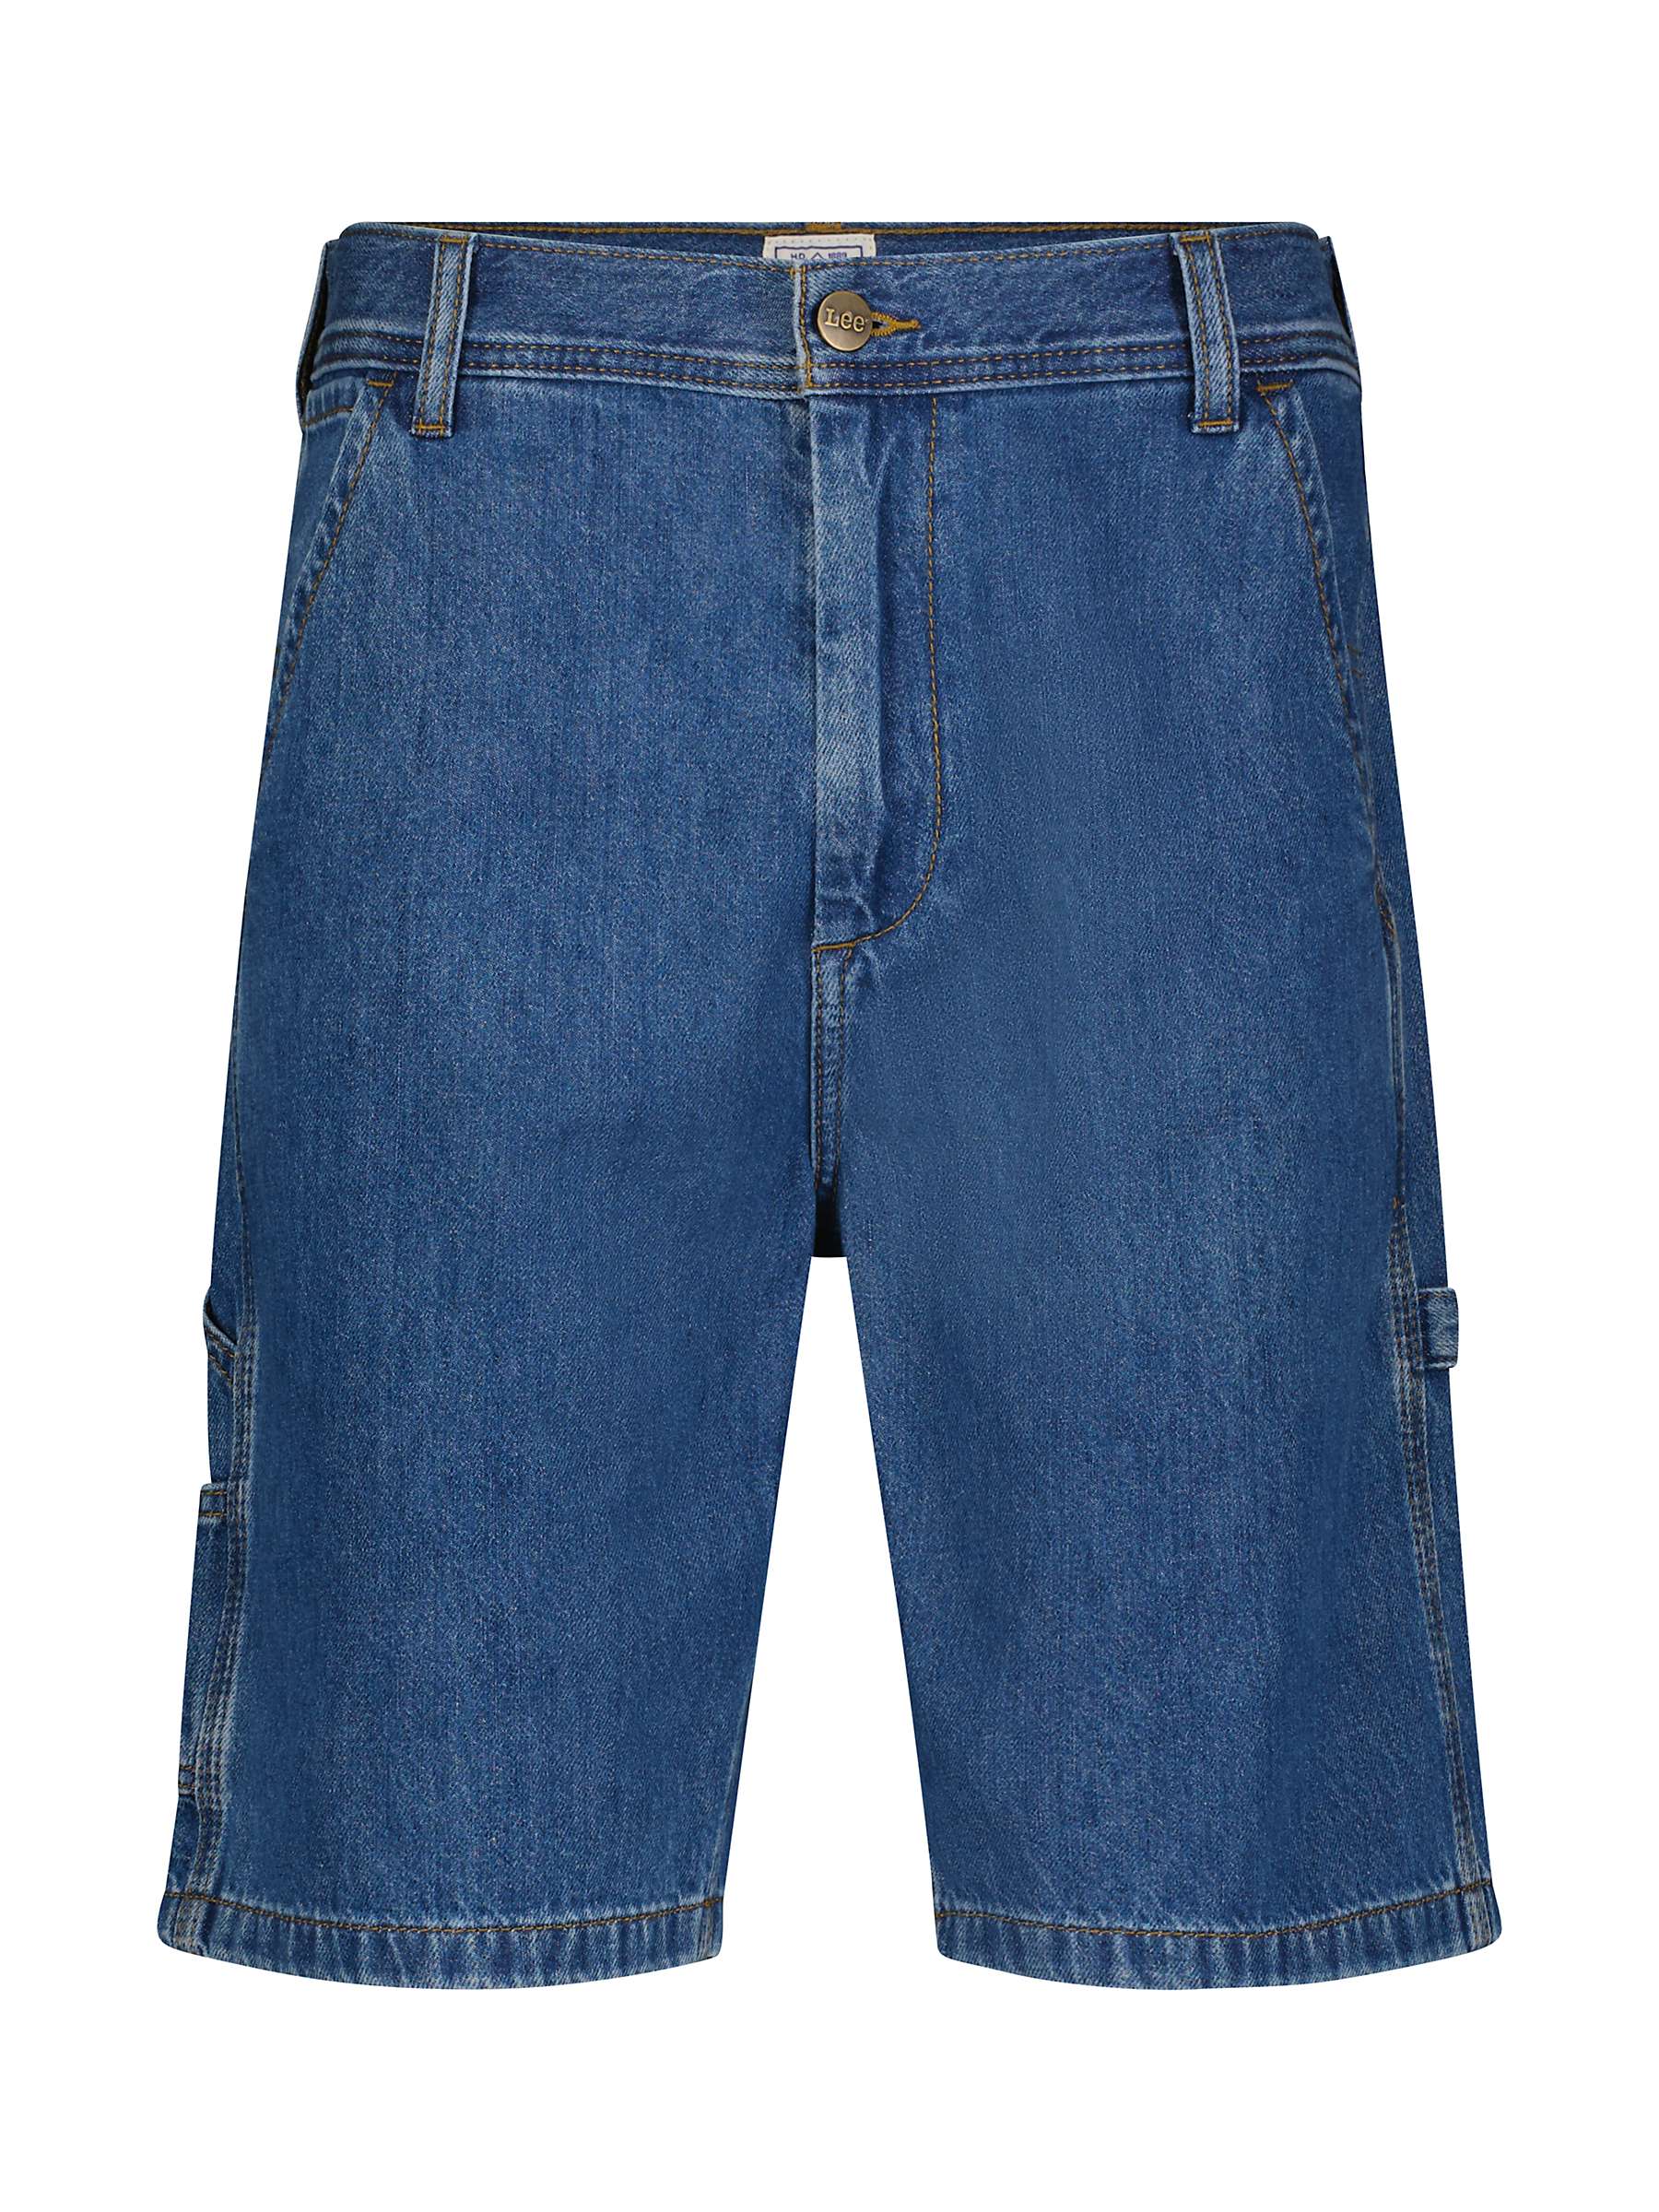 Buy Lee Carpenter Relaxed Fit Denim Shorts, Mid Shade Online at johnlewis.com